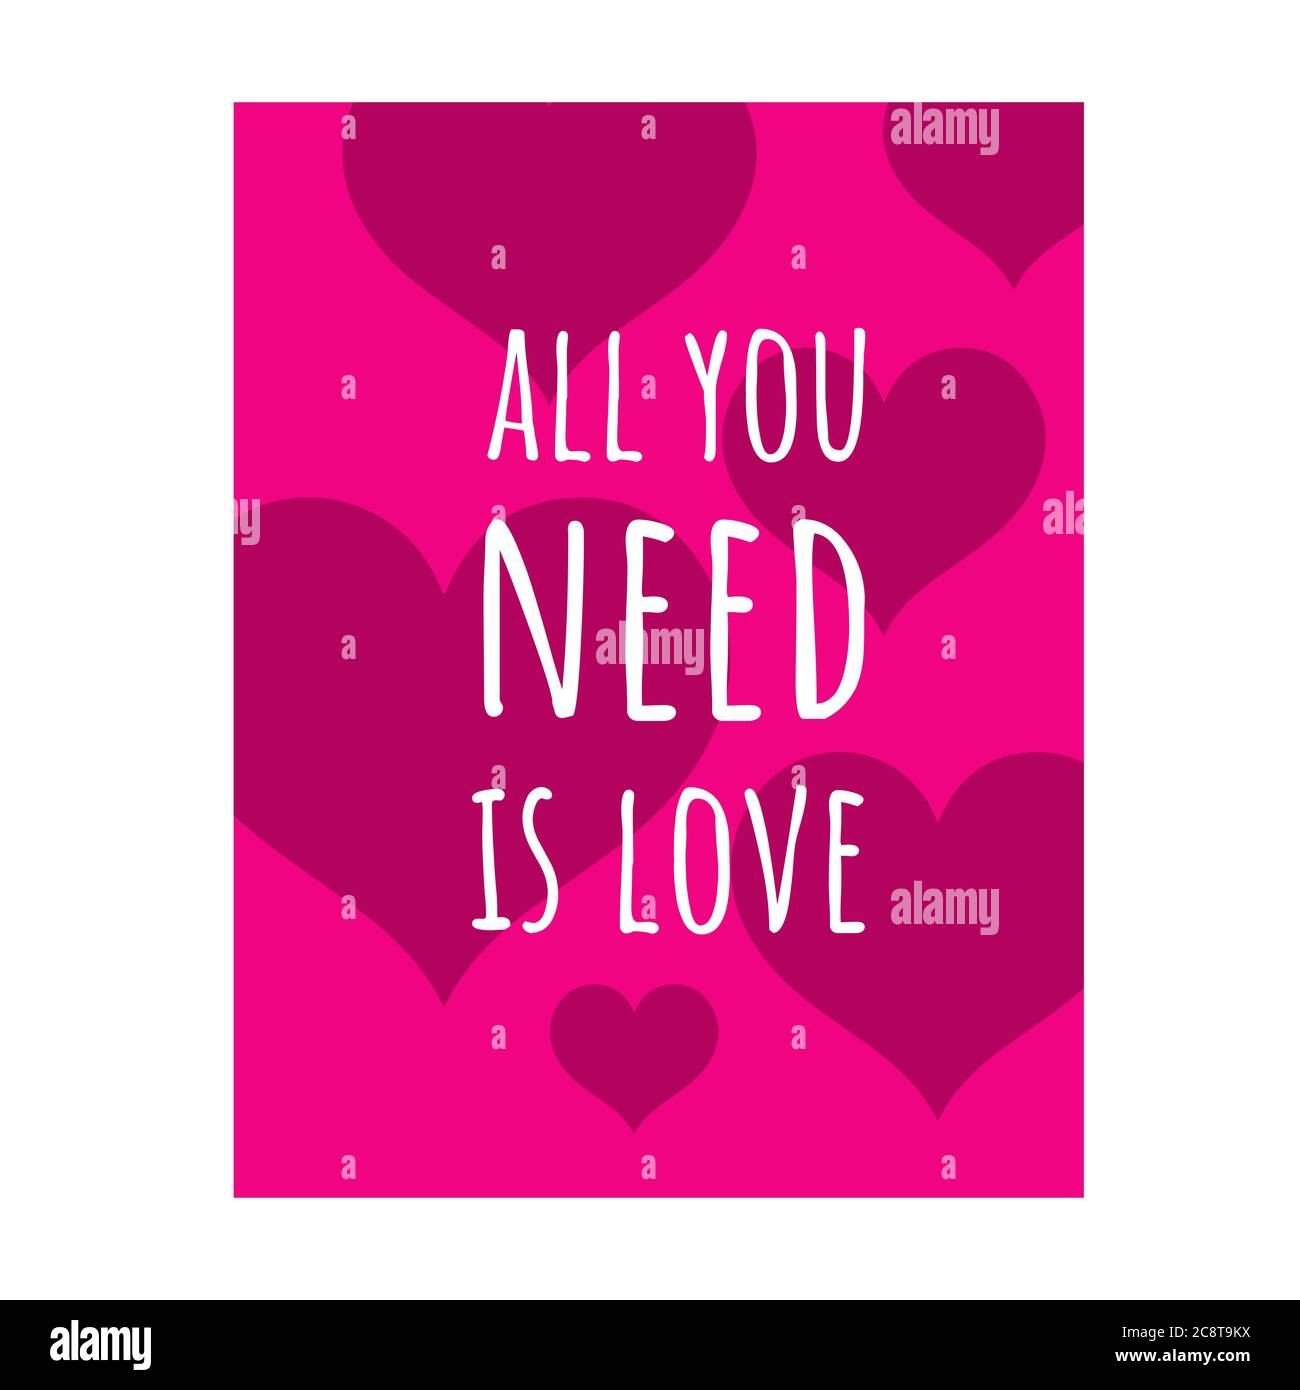 new custom creative inspiring love quotes. all you need is love. positive quote on lovely heart background vector typography stock illustration Stock Vector